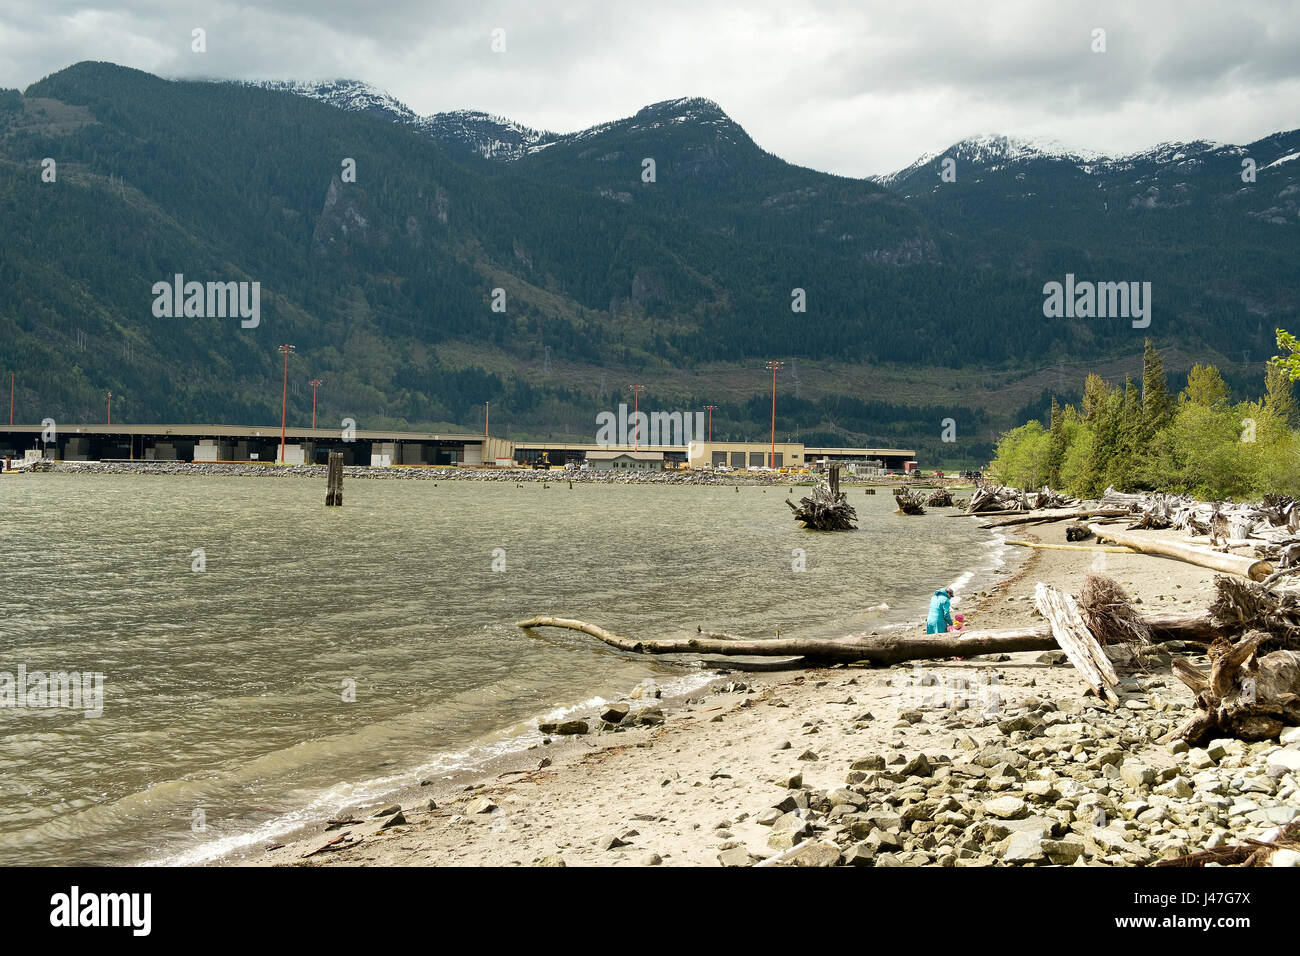 People walk along Newport Beach in Squamish BC, Canada, with the Squamish Terminal cargo port in the Background.  Squamish BC, Canada. Stock Photo